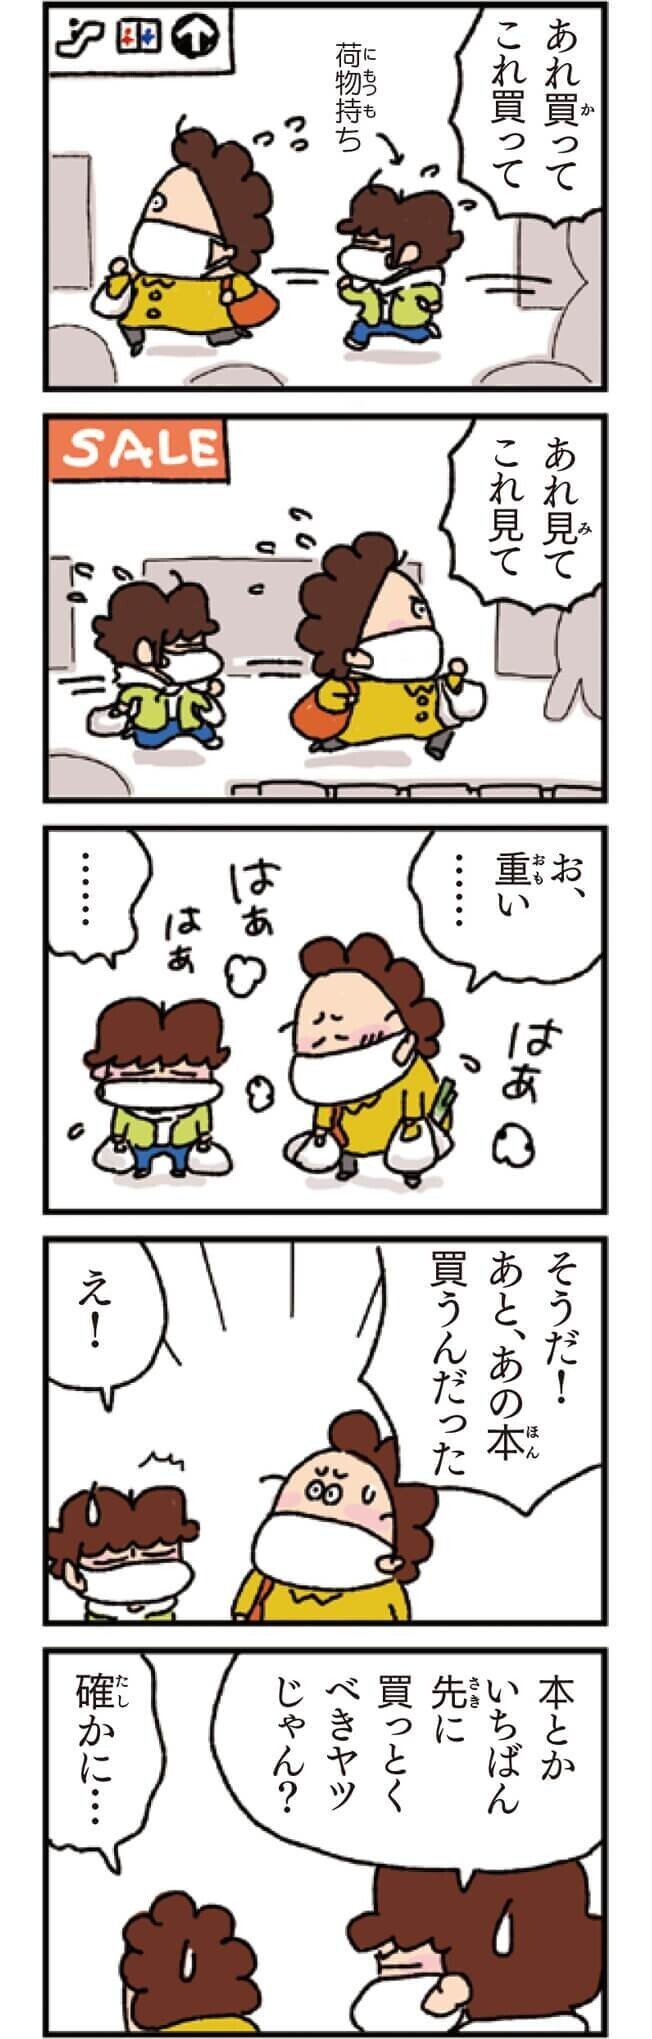 noteあたしンち#32-1